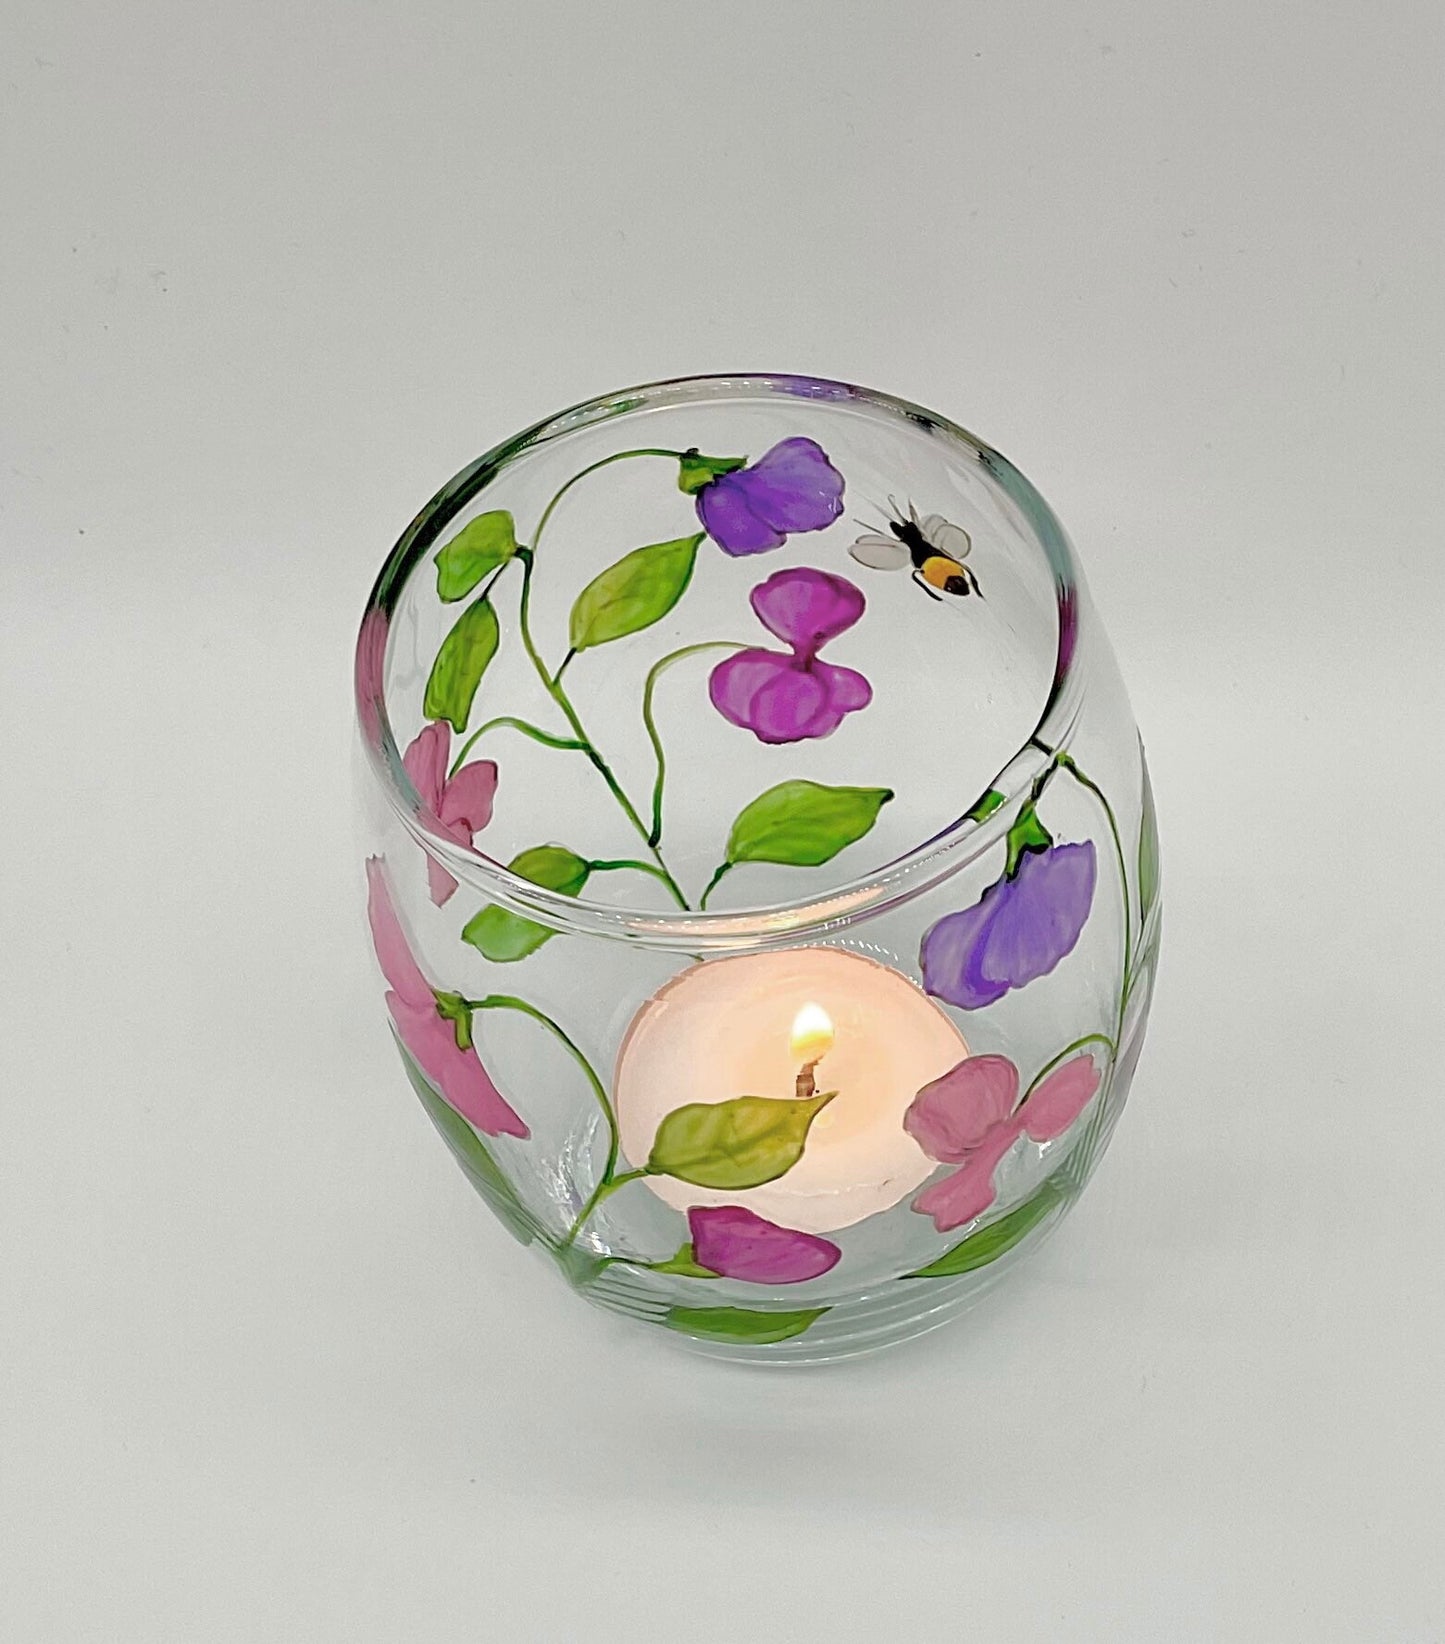 Sweet Peas and Bee design votive/candle holder